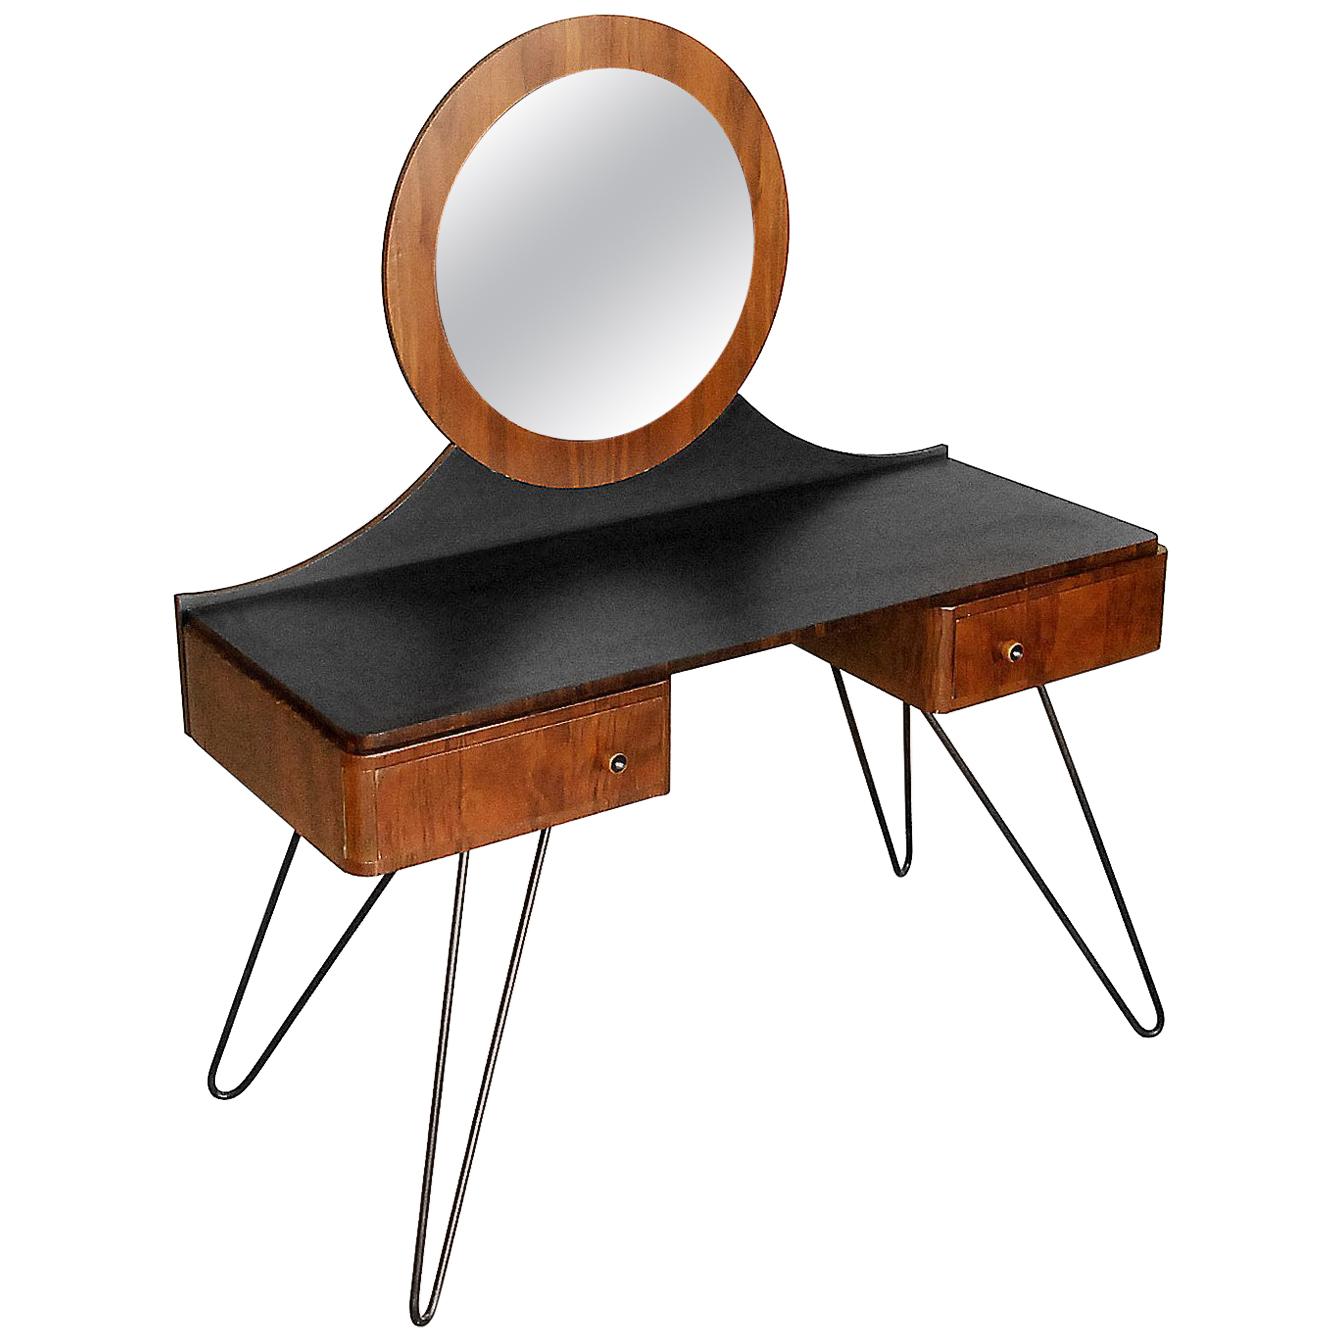 Modern Art Deco Walnut Dressing Table with Round Mirror, 1950s For Sale